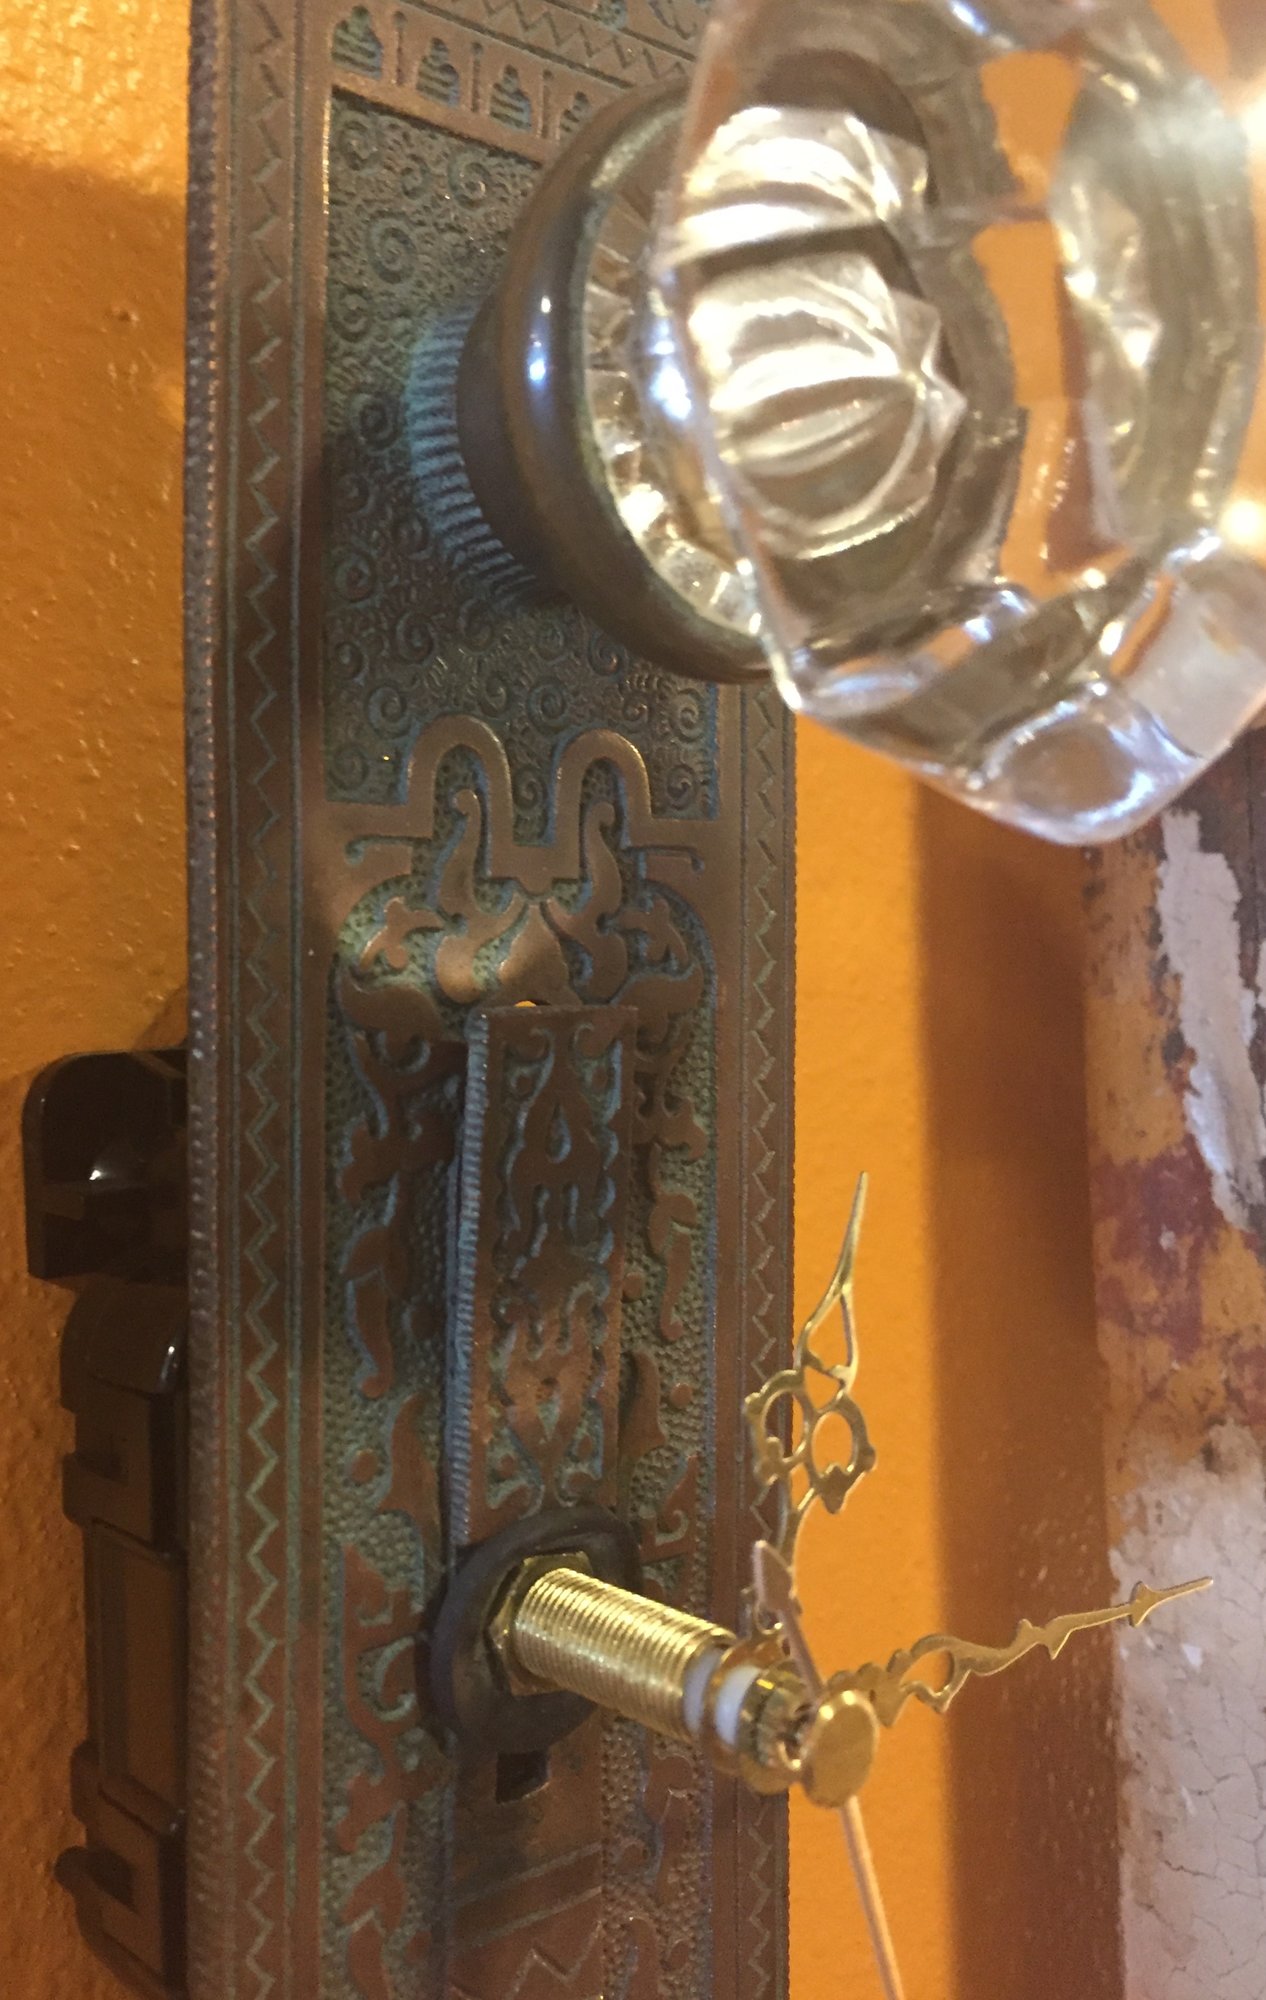 VINTAGE INTRICATE BRASS CLOCK WITH PENDULUM.
AWESOME FOR ANY ECLECTIC ROOM!

H: 8.5 INCHES    W: 2.5 INCHES

INSTORE PICK-UP OR SHIPPING